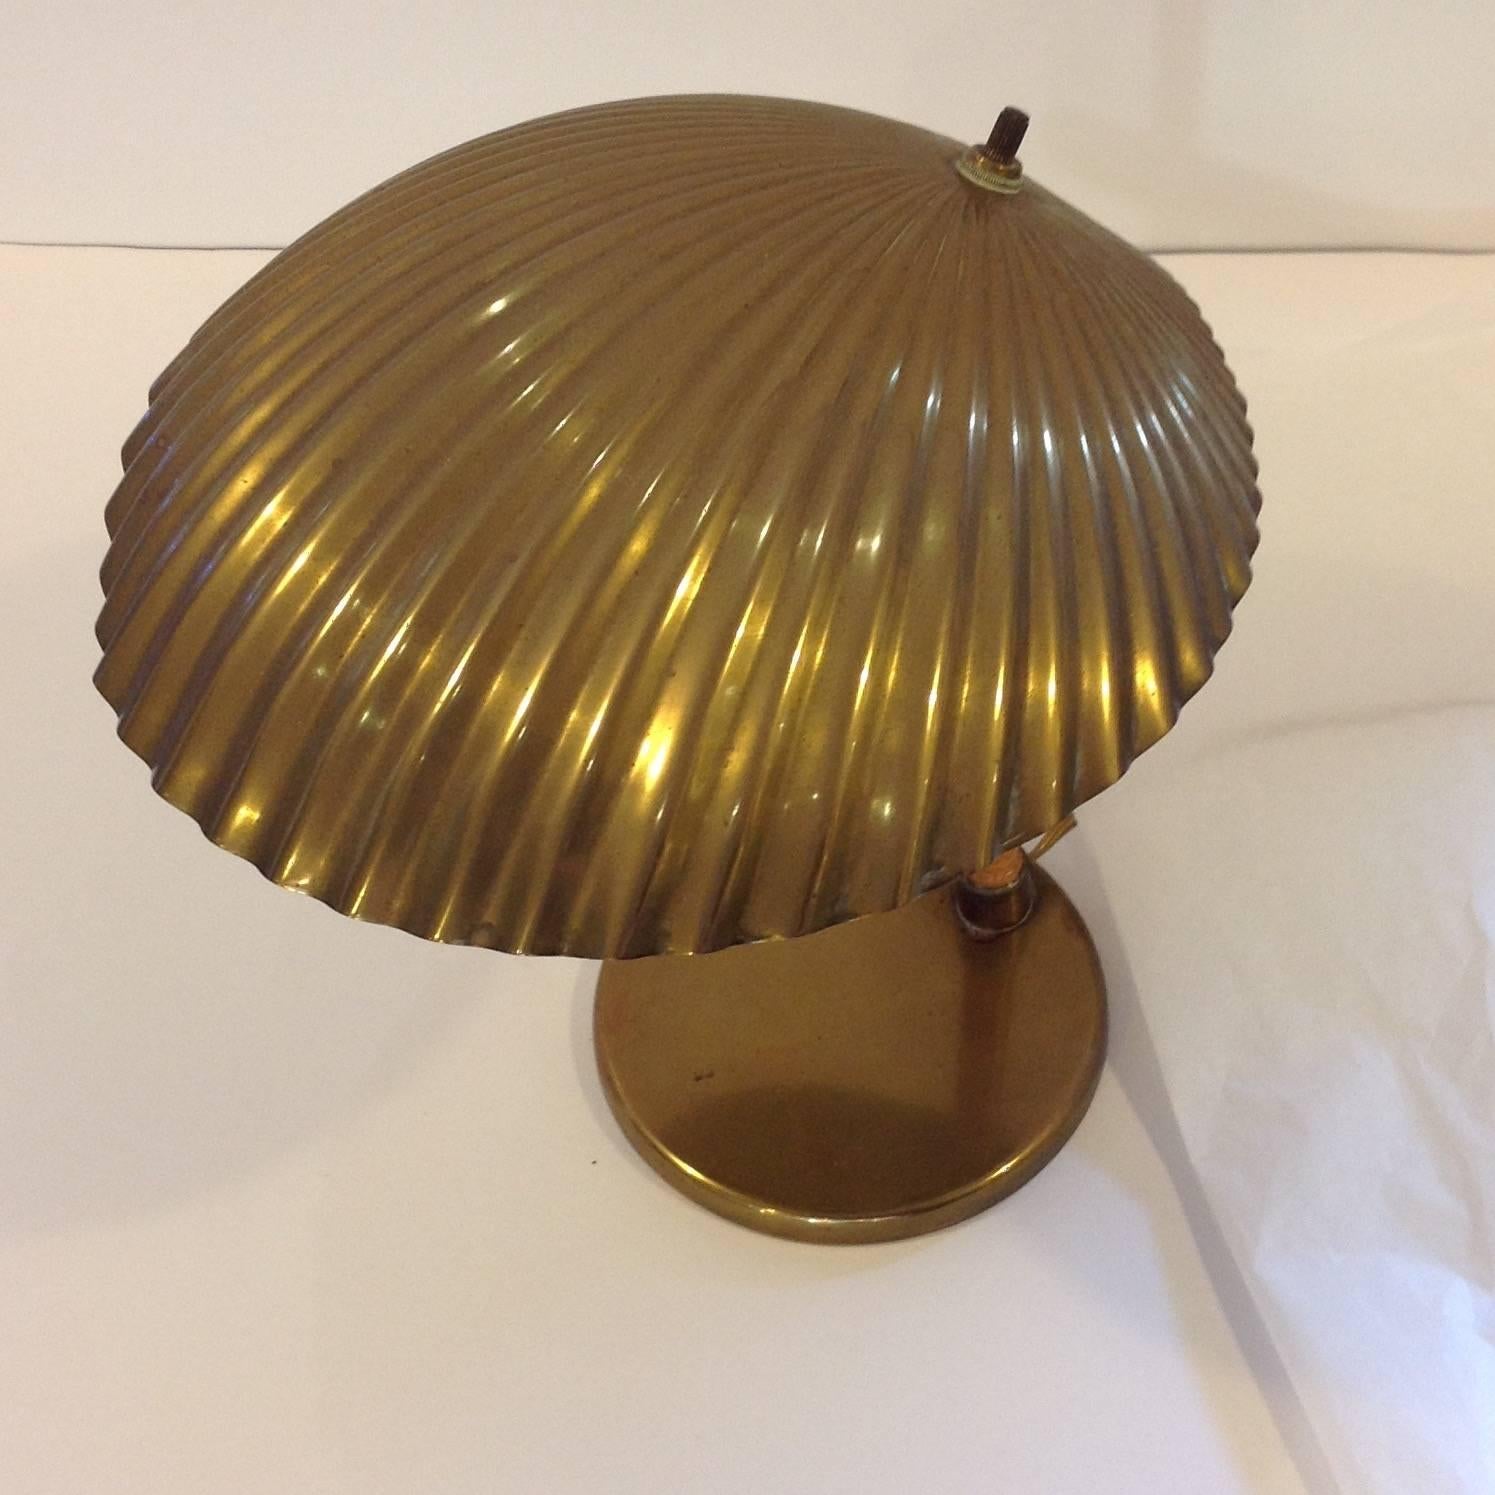 Desk lamp with brass clam shell shade and rattan pole, designed by Paavo Tynell. Made in Finland and manufactured by Taito Oy. It was designed in 1938. The base is marked TT Oy Taito AB 5321.
Made in Finland, circa 1940s.

 